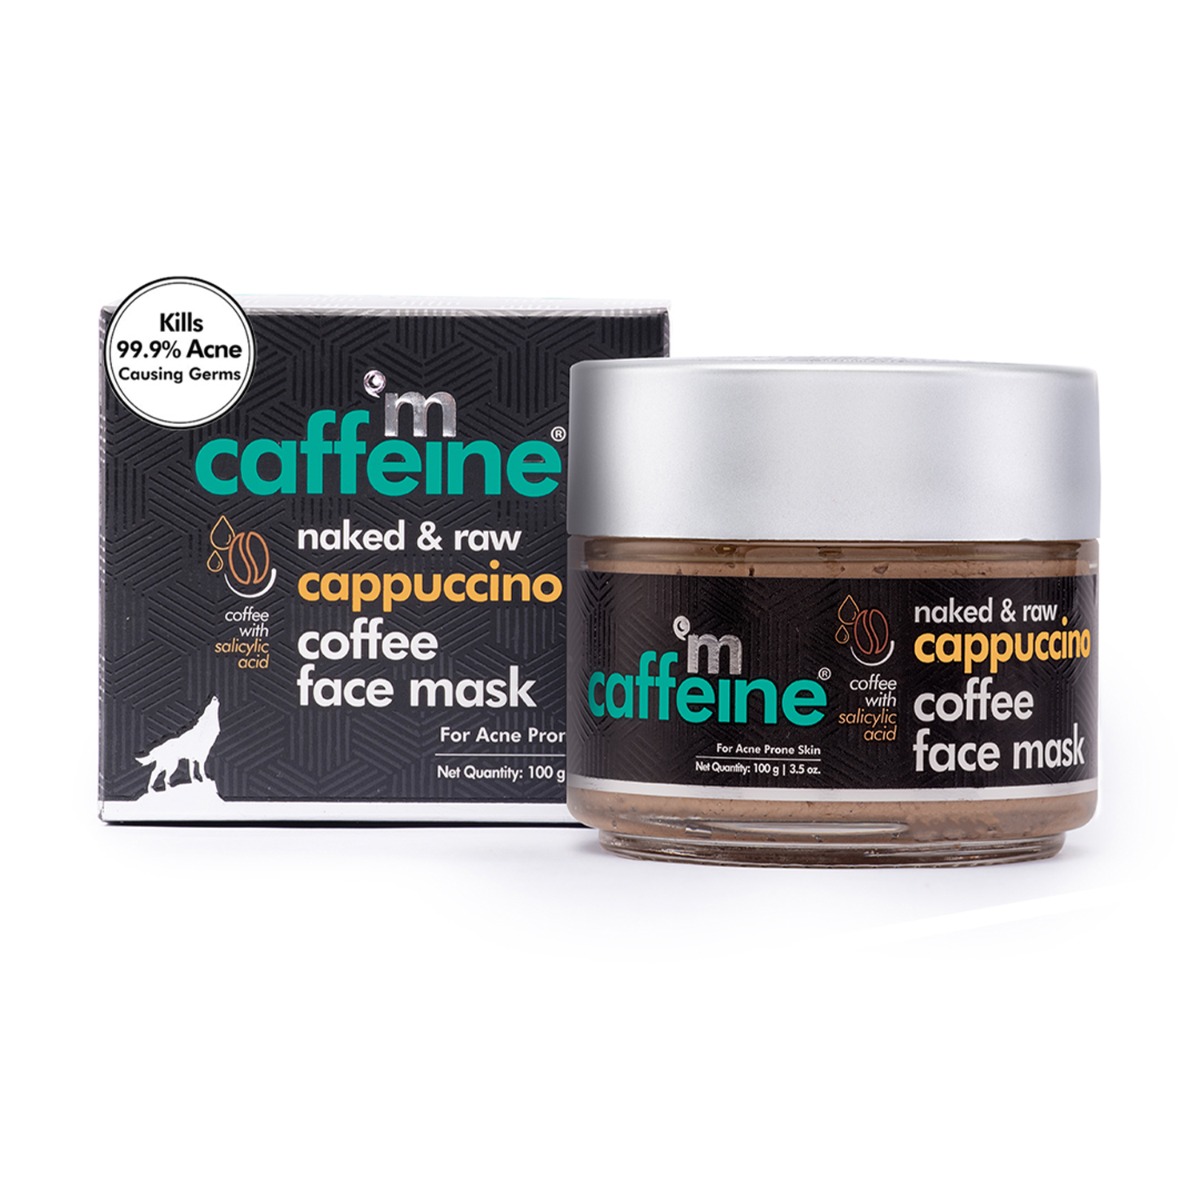 mCaffeine Anti Acne Cappuccino Coffee Face Mask - Clay Face Pack with Salicylic Acid for Oil Control, 100gm